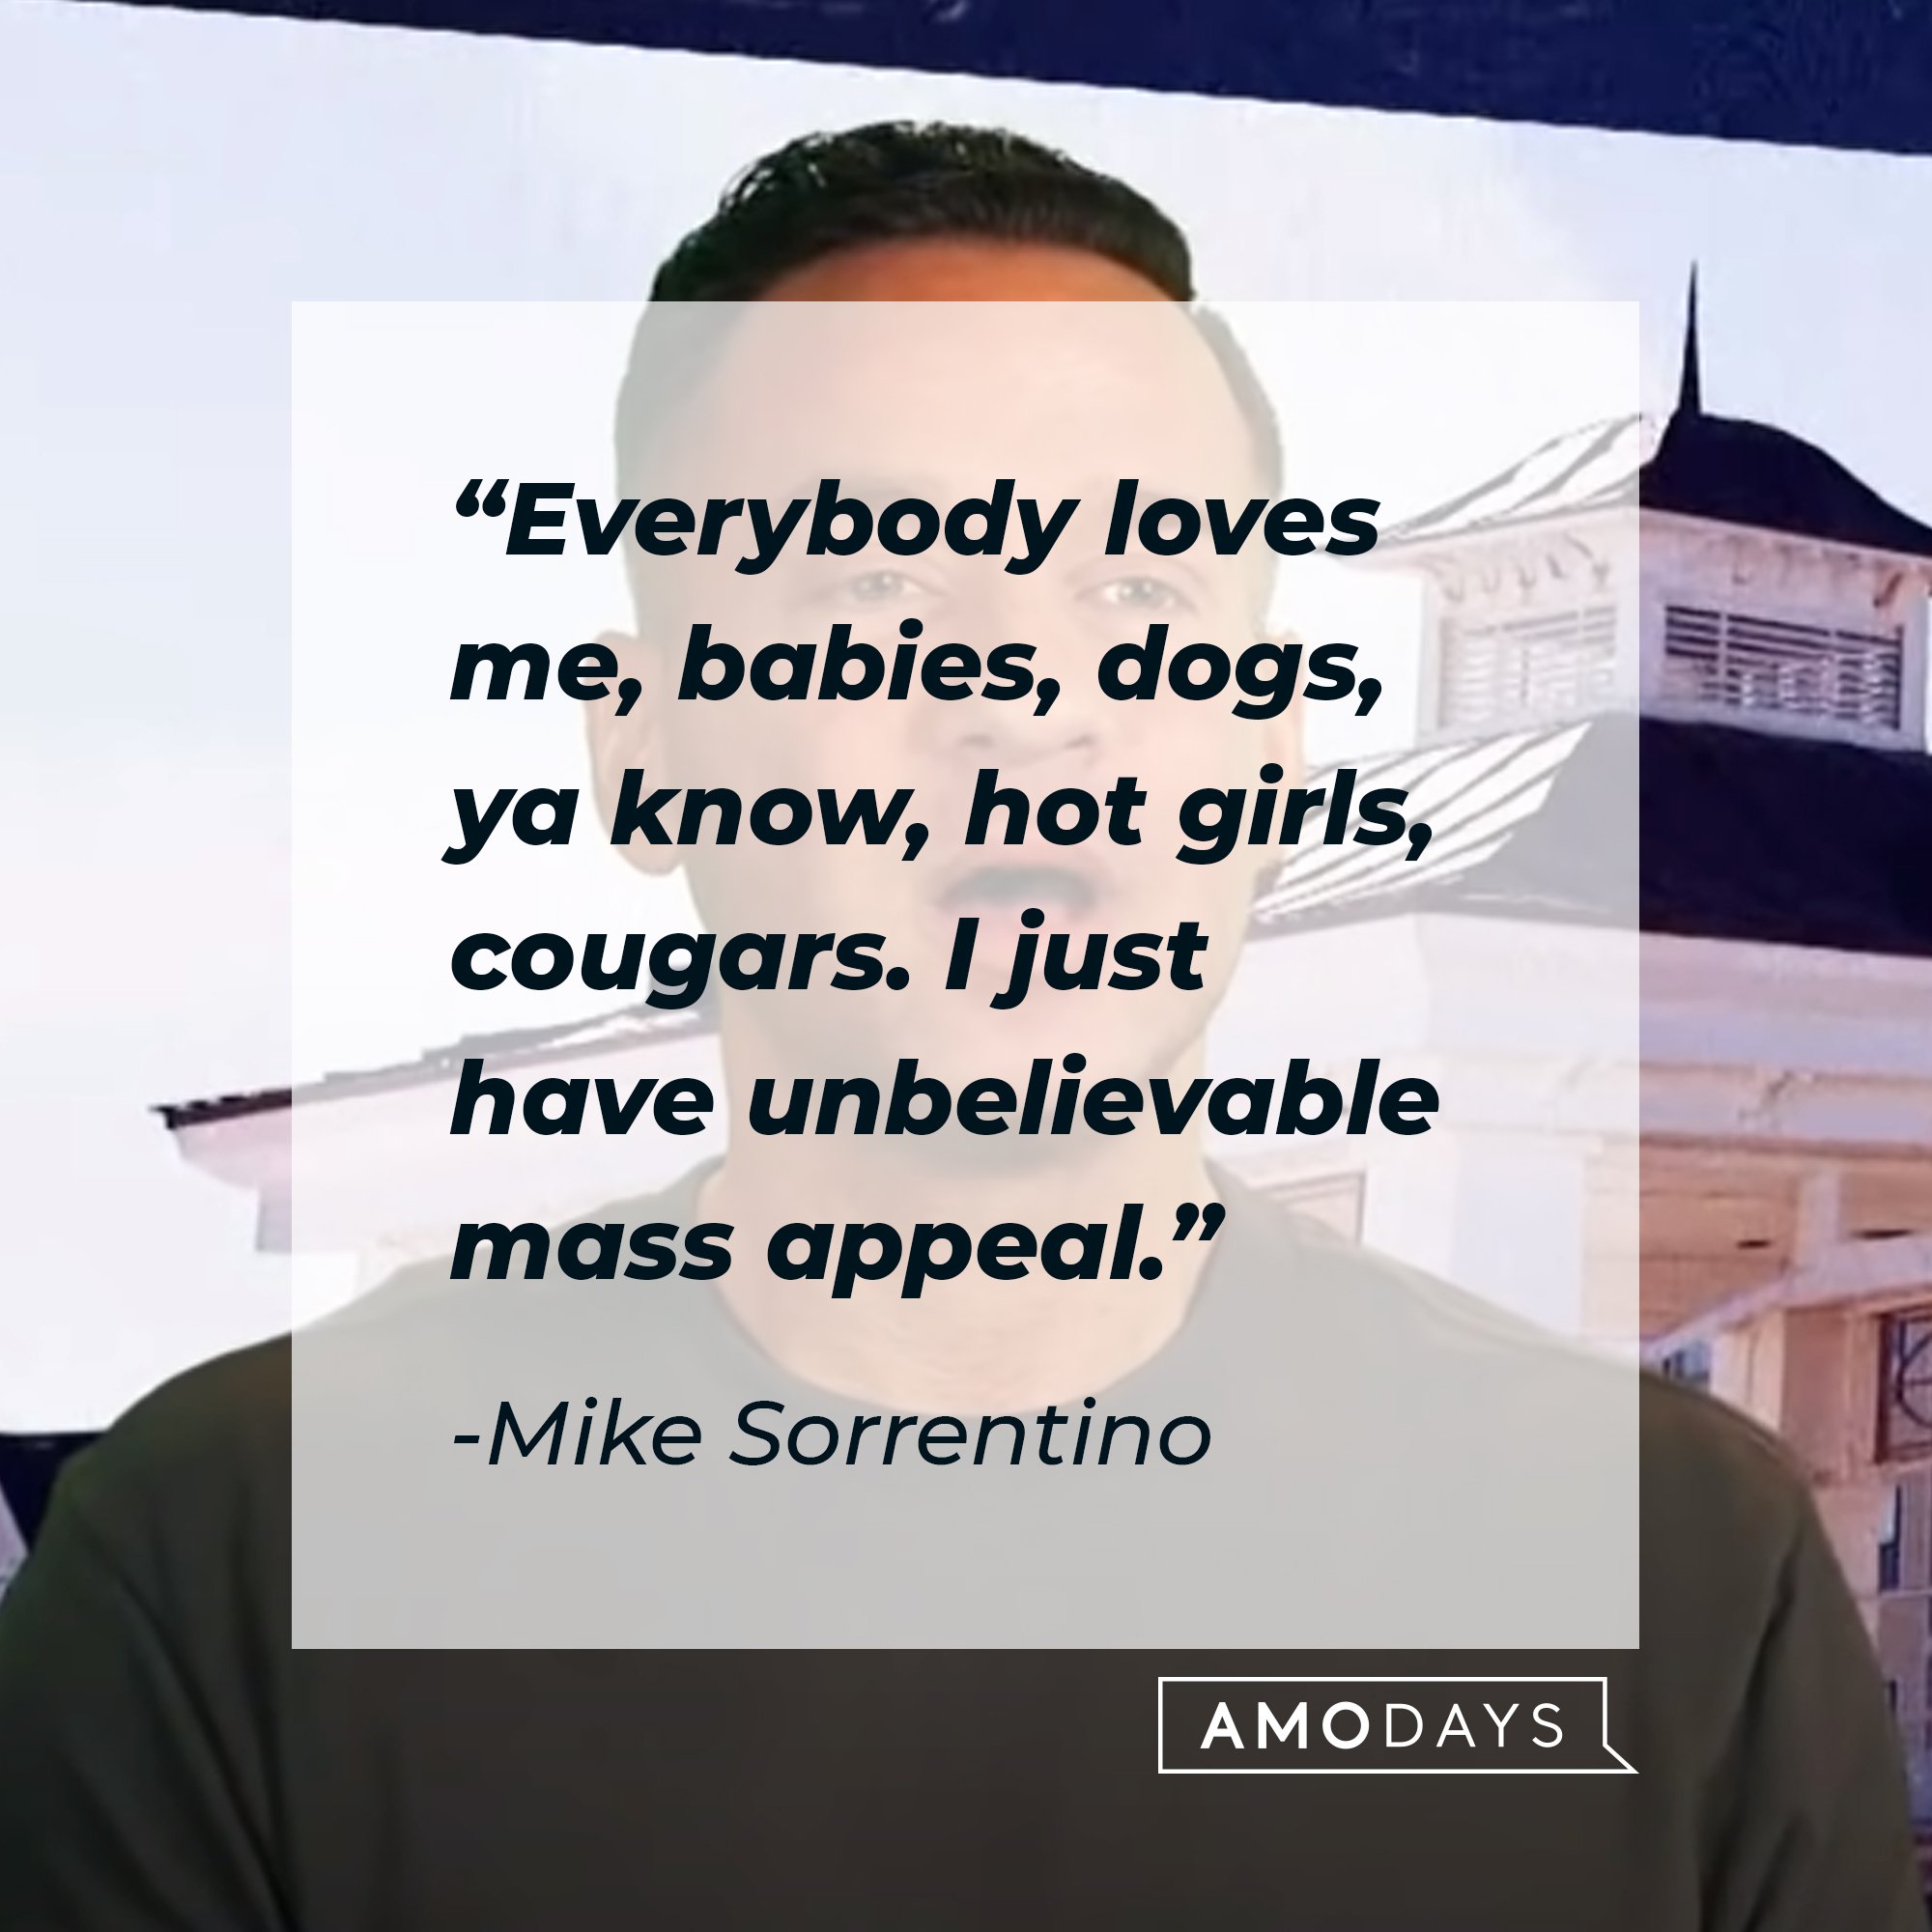 Mike Sorrentino’s quote: "Everybody loves me, babies, dogs, ya know, hot girls, cougars. I just have unbelievable mass appeal." | Image: AmoDays